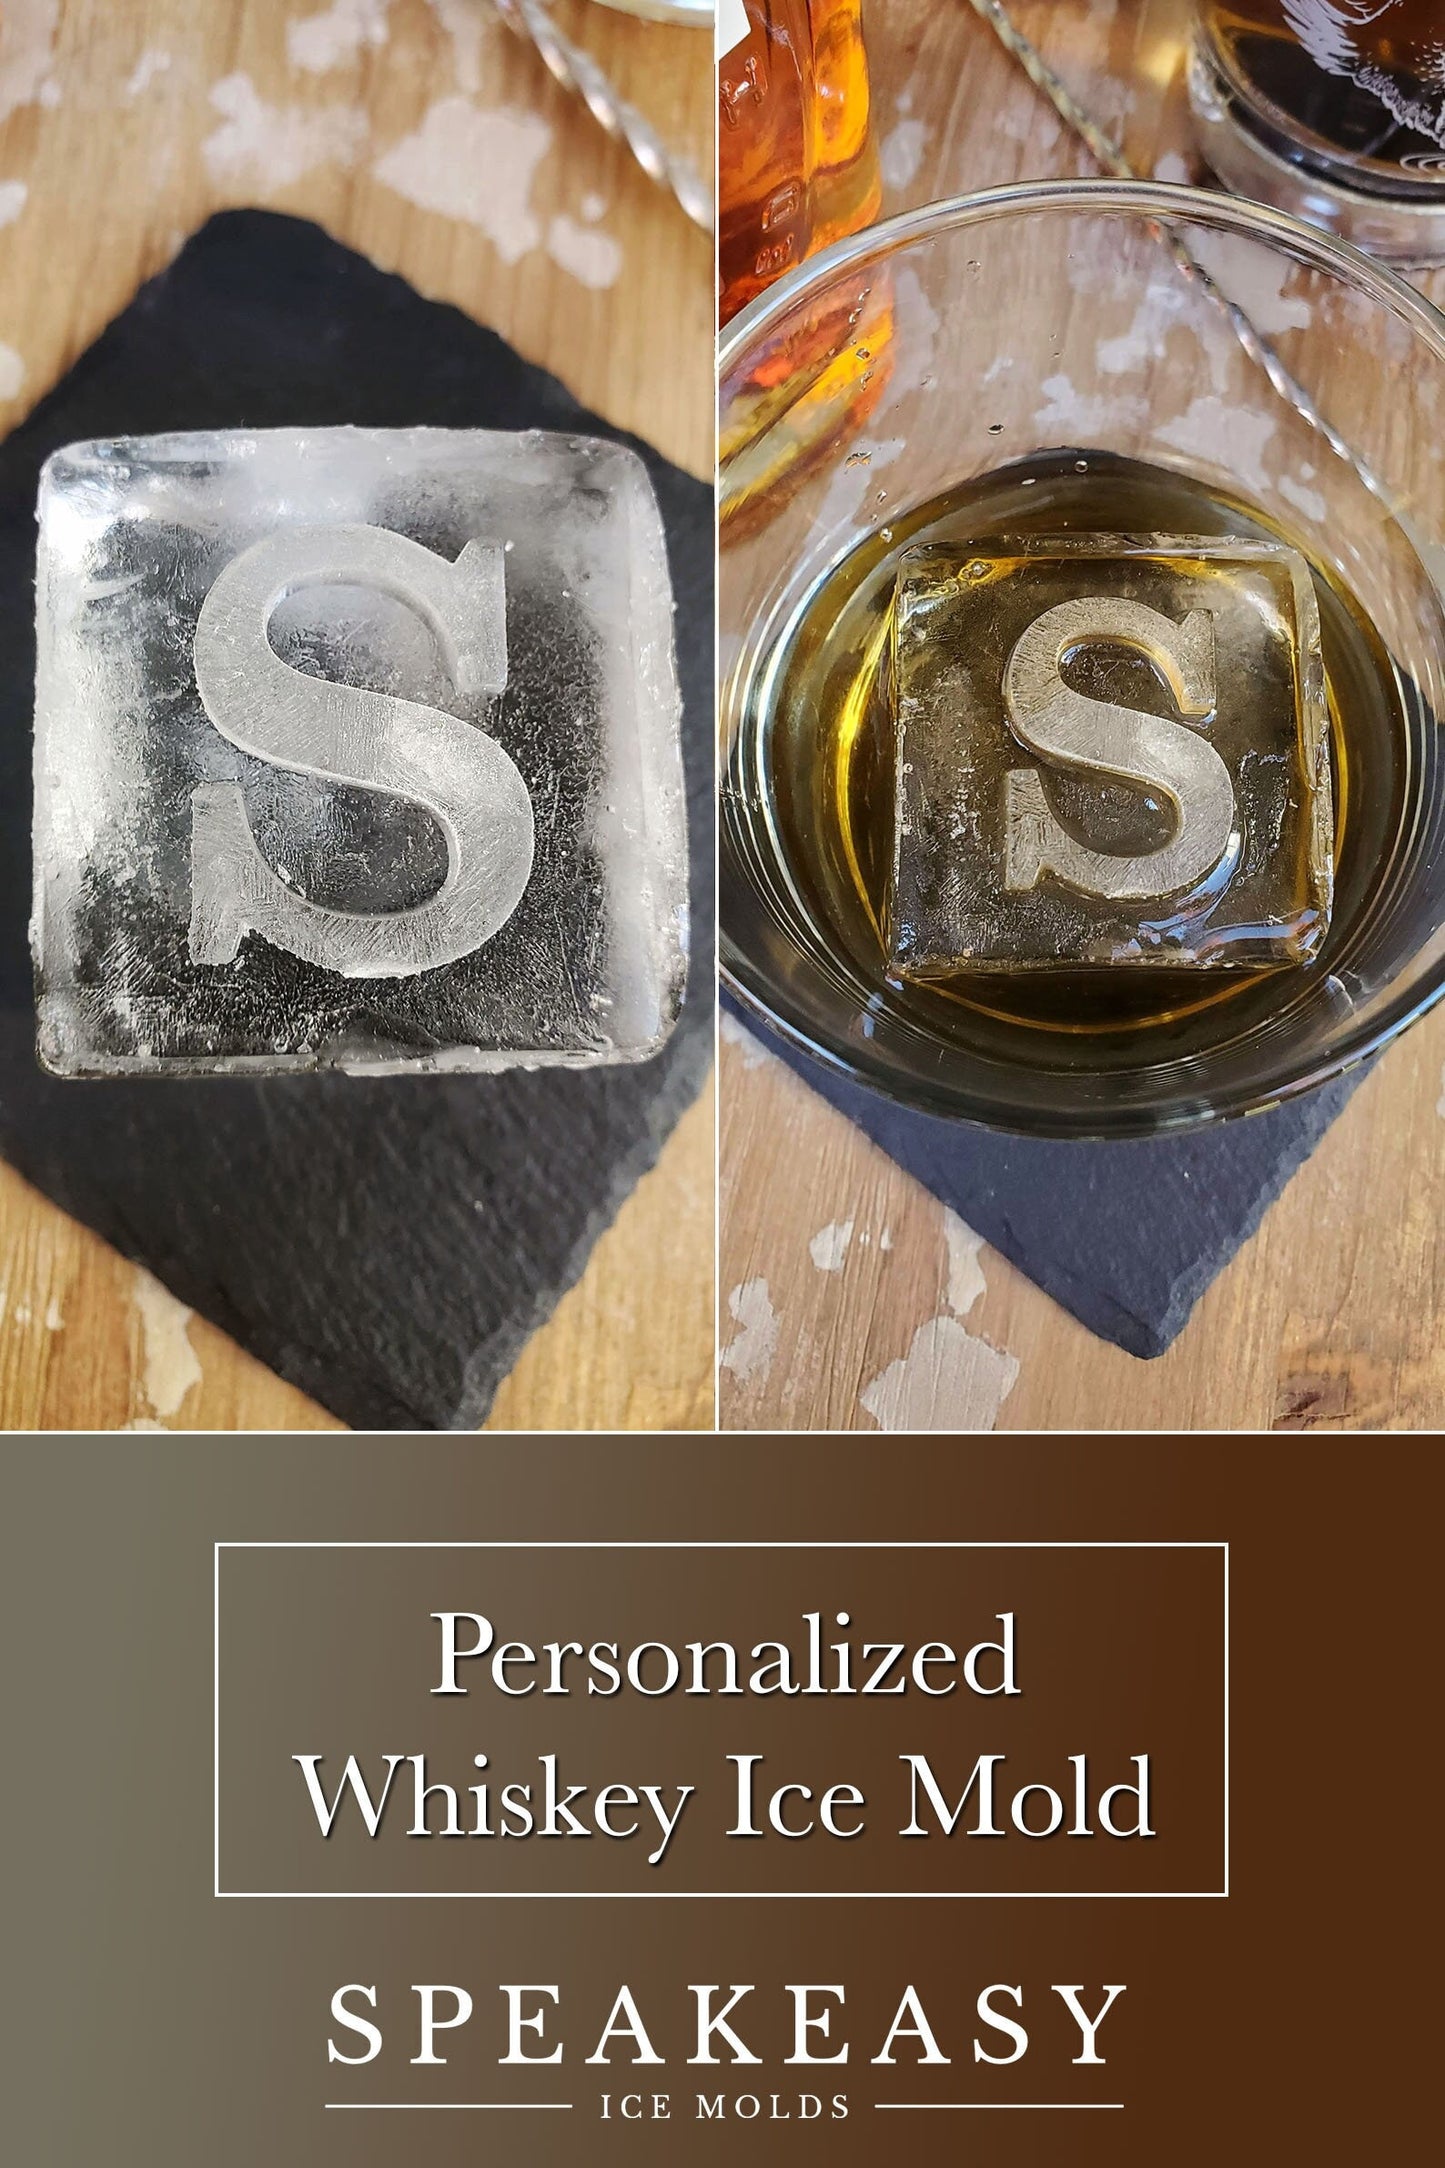 Whiskey Gift idea for Dad, Groom, Boss | Personalized silicone ice mold for engagement gift, Custom whiskey ice cubes, Groomsmen gift idea